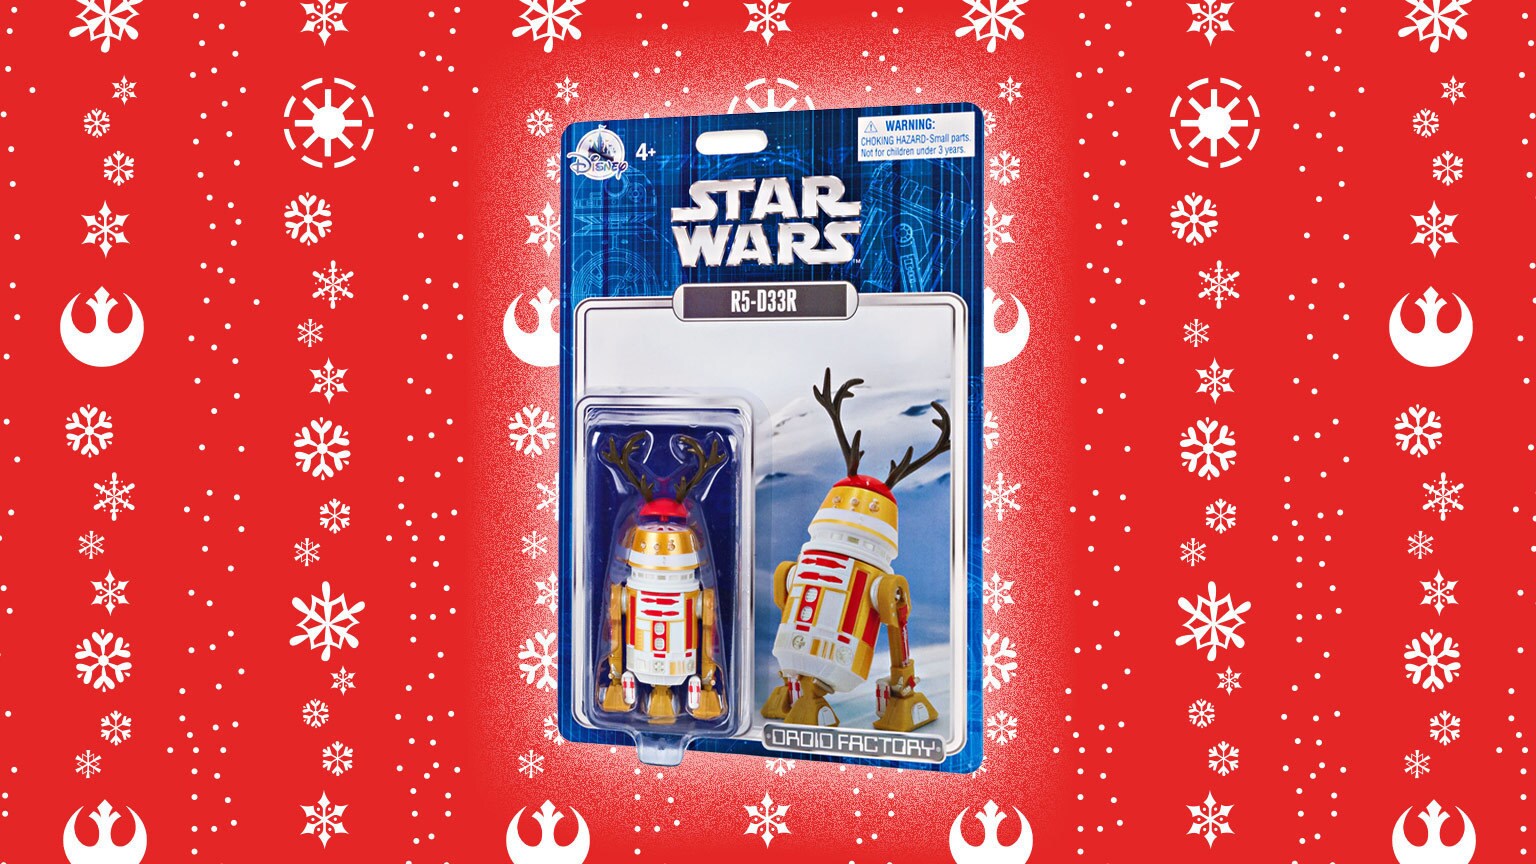 Meet R5-D33R, the Holiday Droid of Hoth